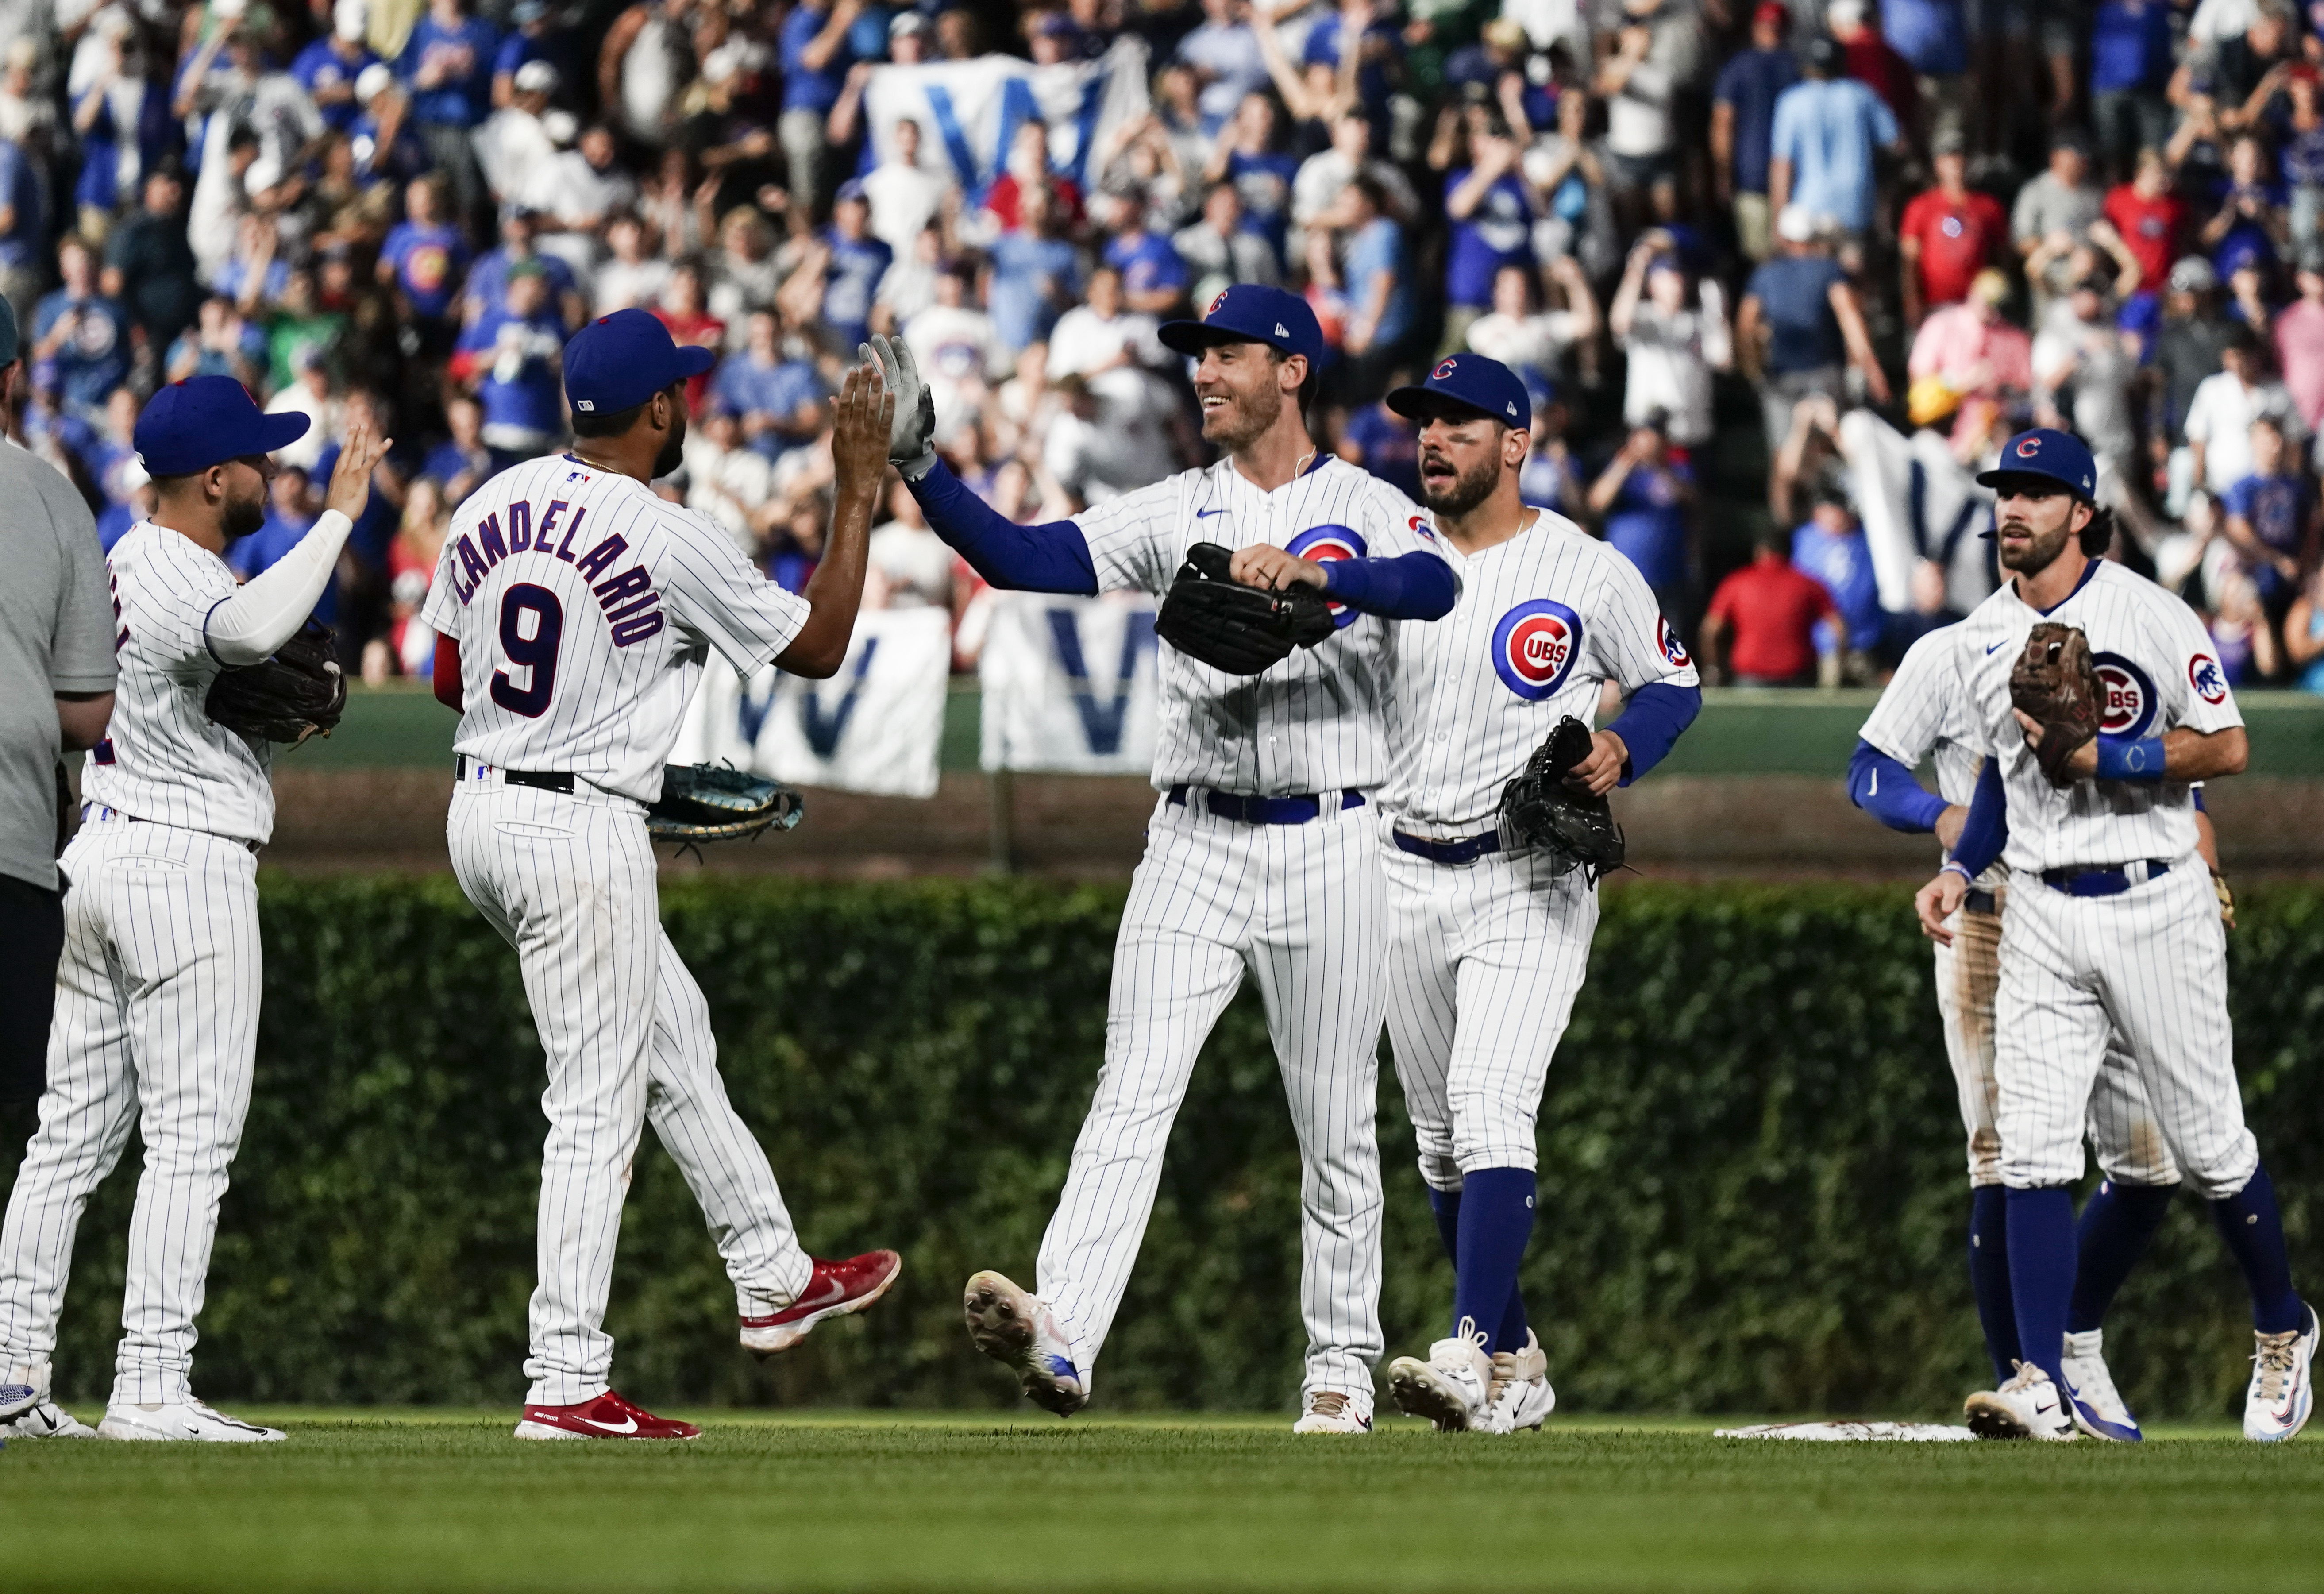 Chicago Cubs on X: We call this skill the 9th inning stretch